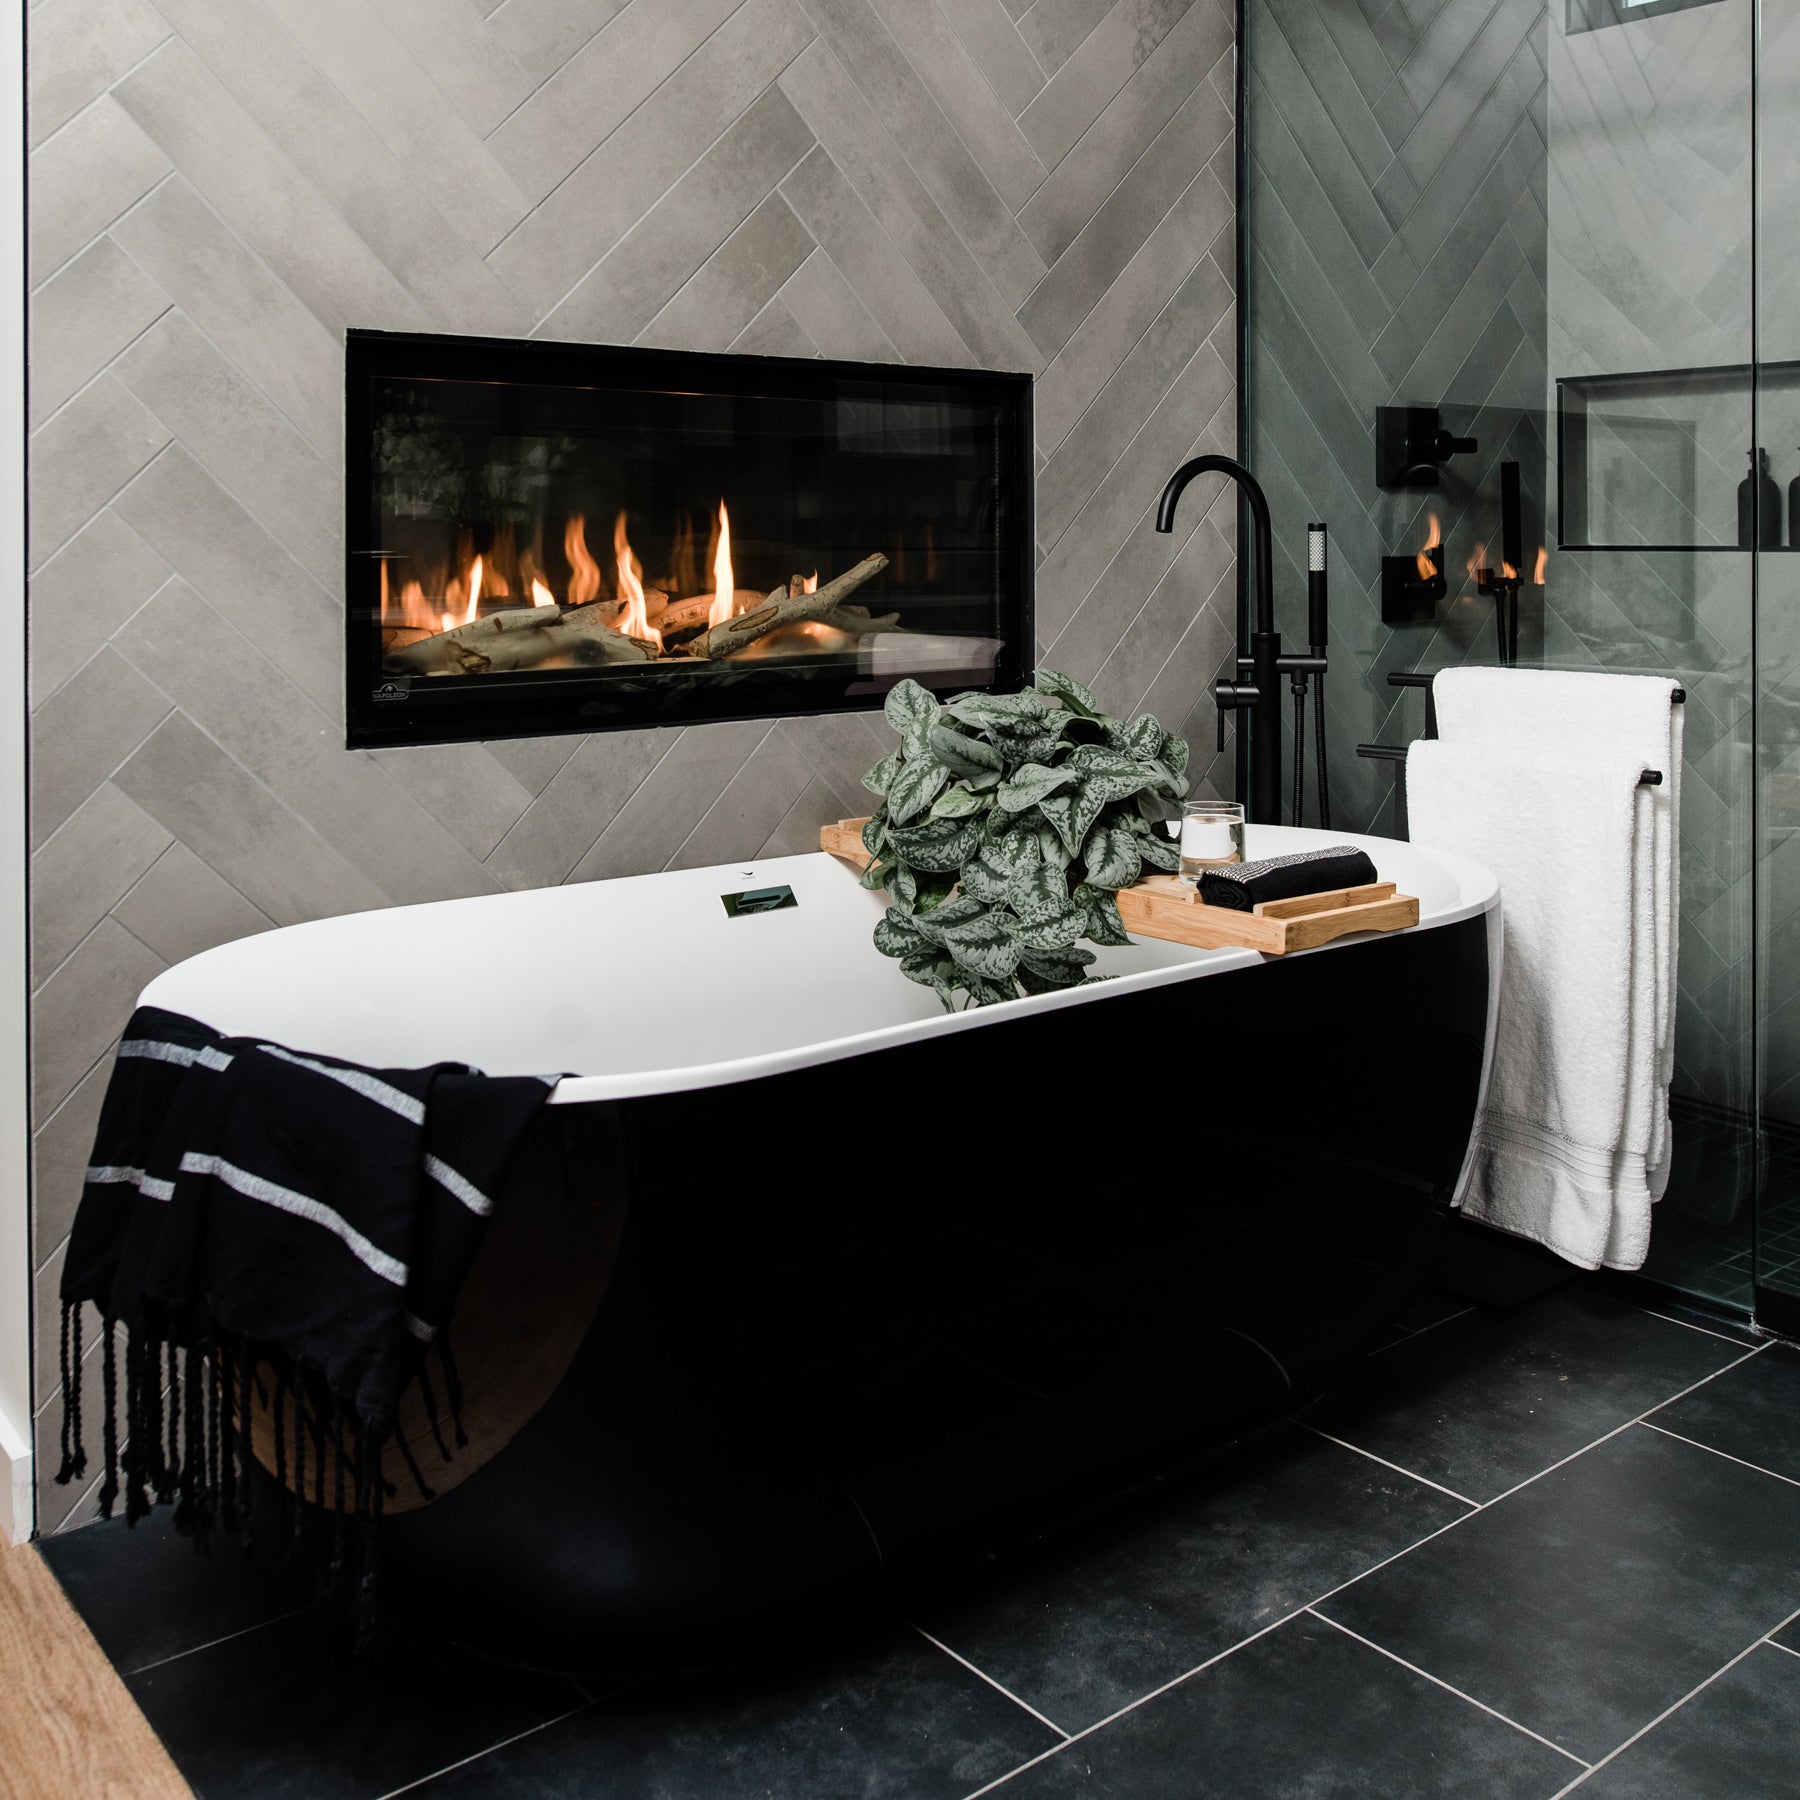 A large soaking tub draped with a black cotton towel, and a bath tray with a towel, plant and candle.